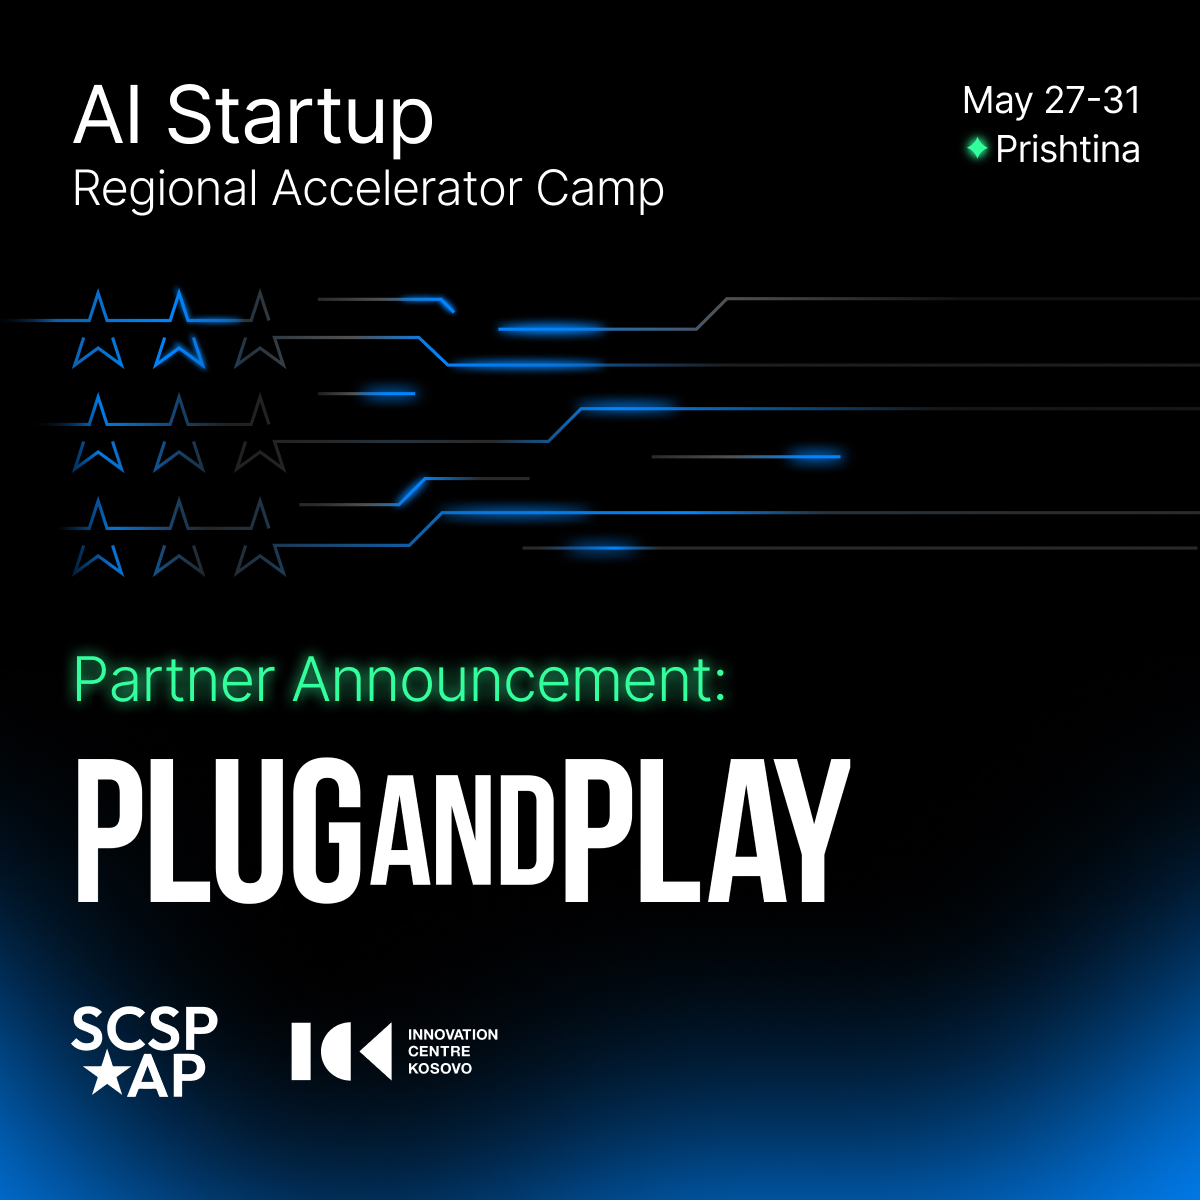 We have some great news to share this morning 🥳 @PlugandPlayTC is now officially one of the key partners for our joint 'AI Startup Regional Accelerator Camp' with the Special Competitive Studies Project - @scsp_ai.